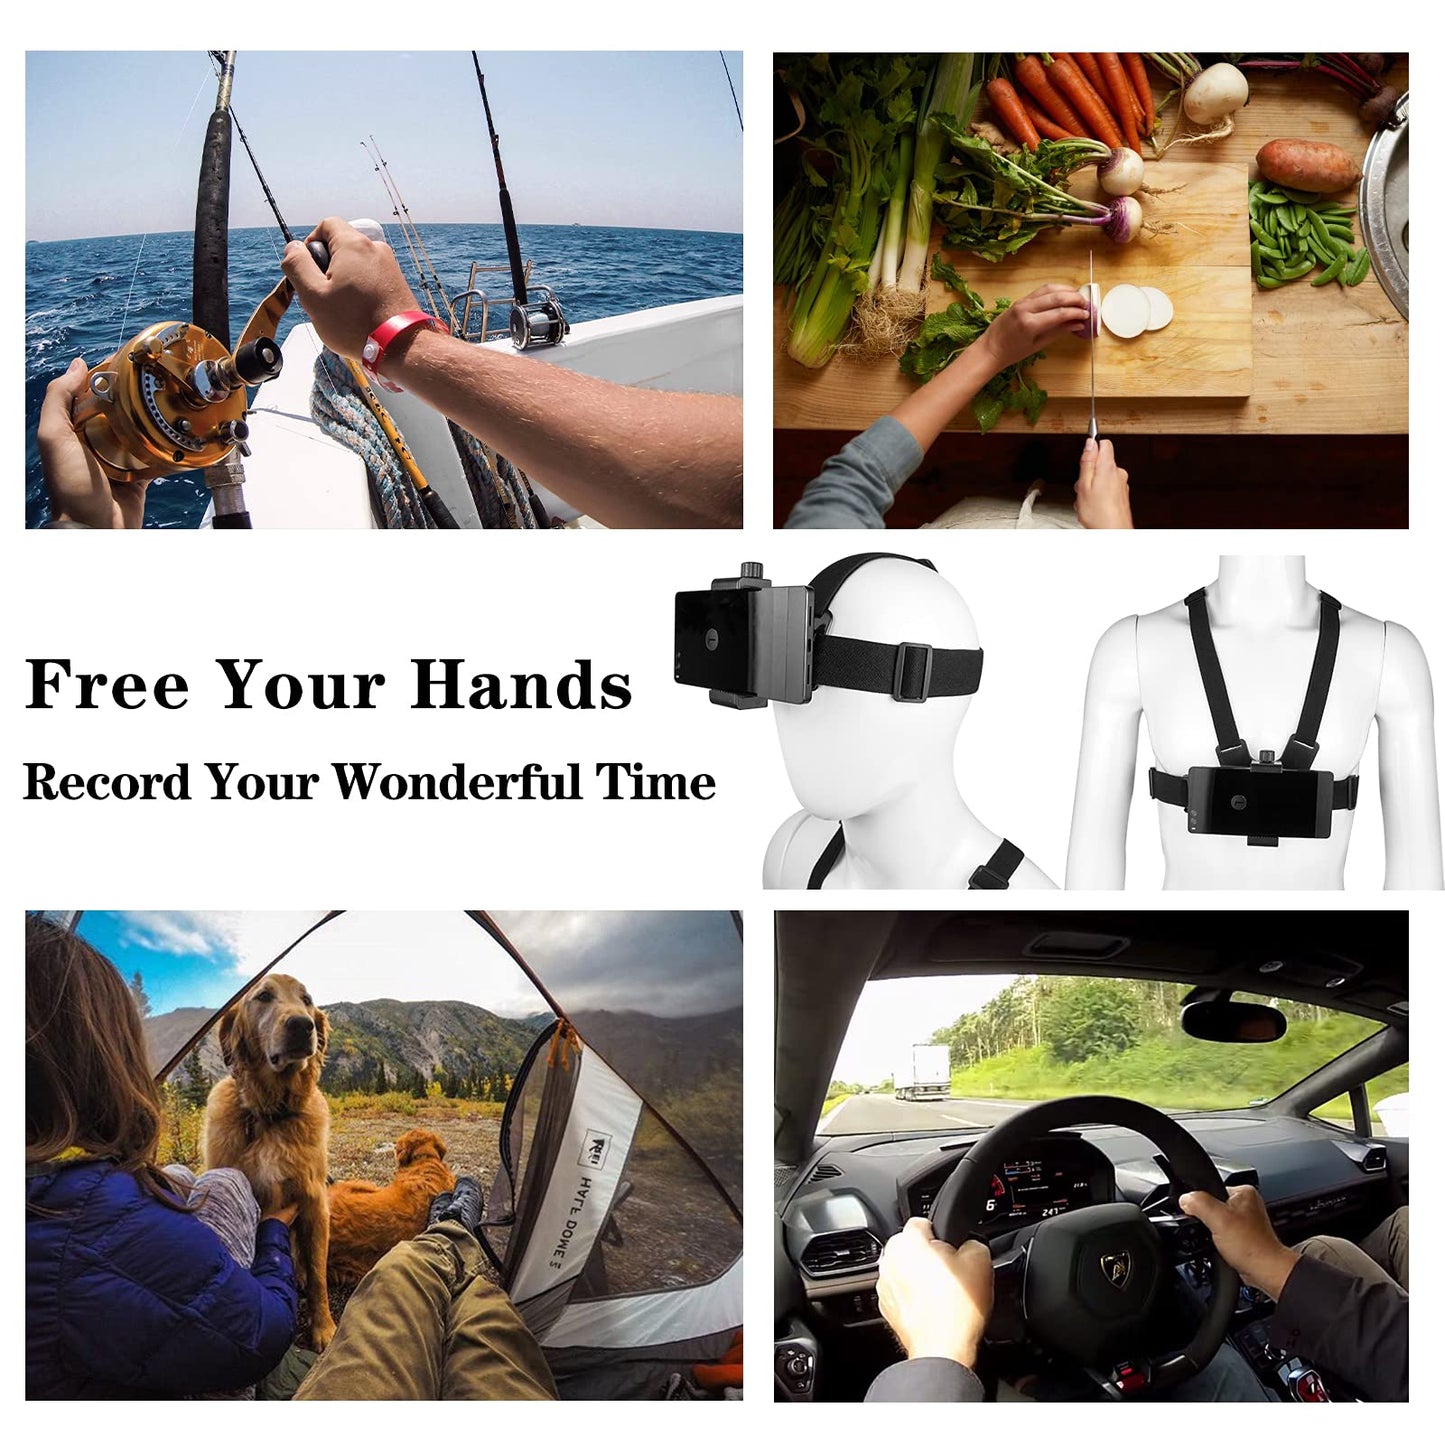 Phone Chest Mount Harness Vest and Head Strap Clip Holder for POV/VLOG, Compatible with iPhone,Samsung,GoPro Hero,DJI Osmo,AKASO and Action Cameras